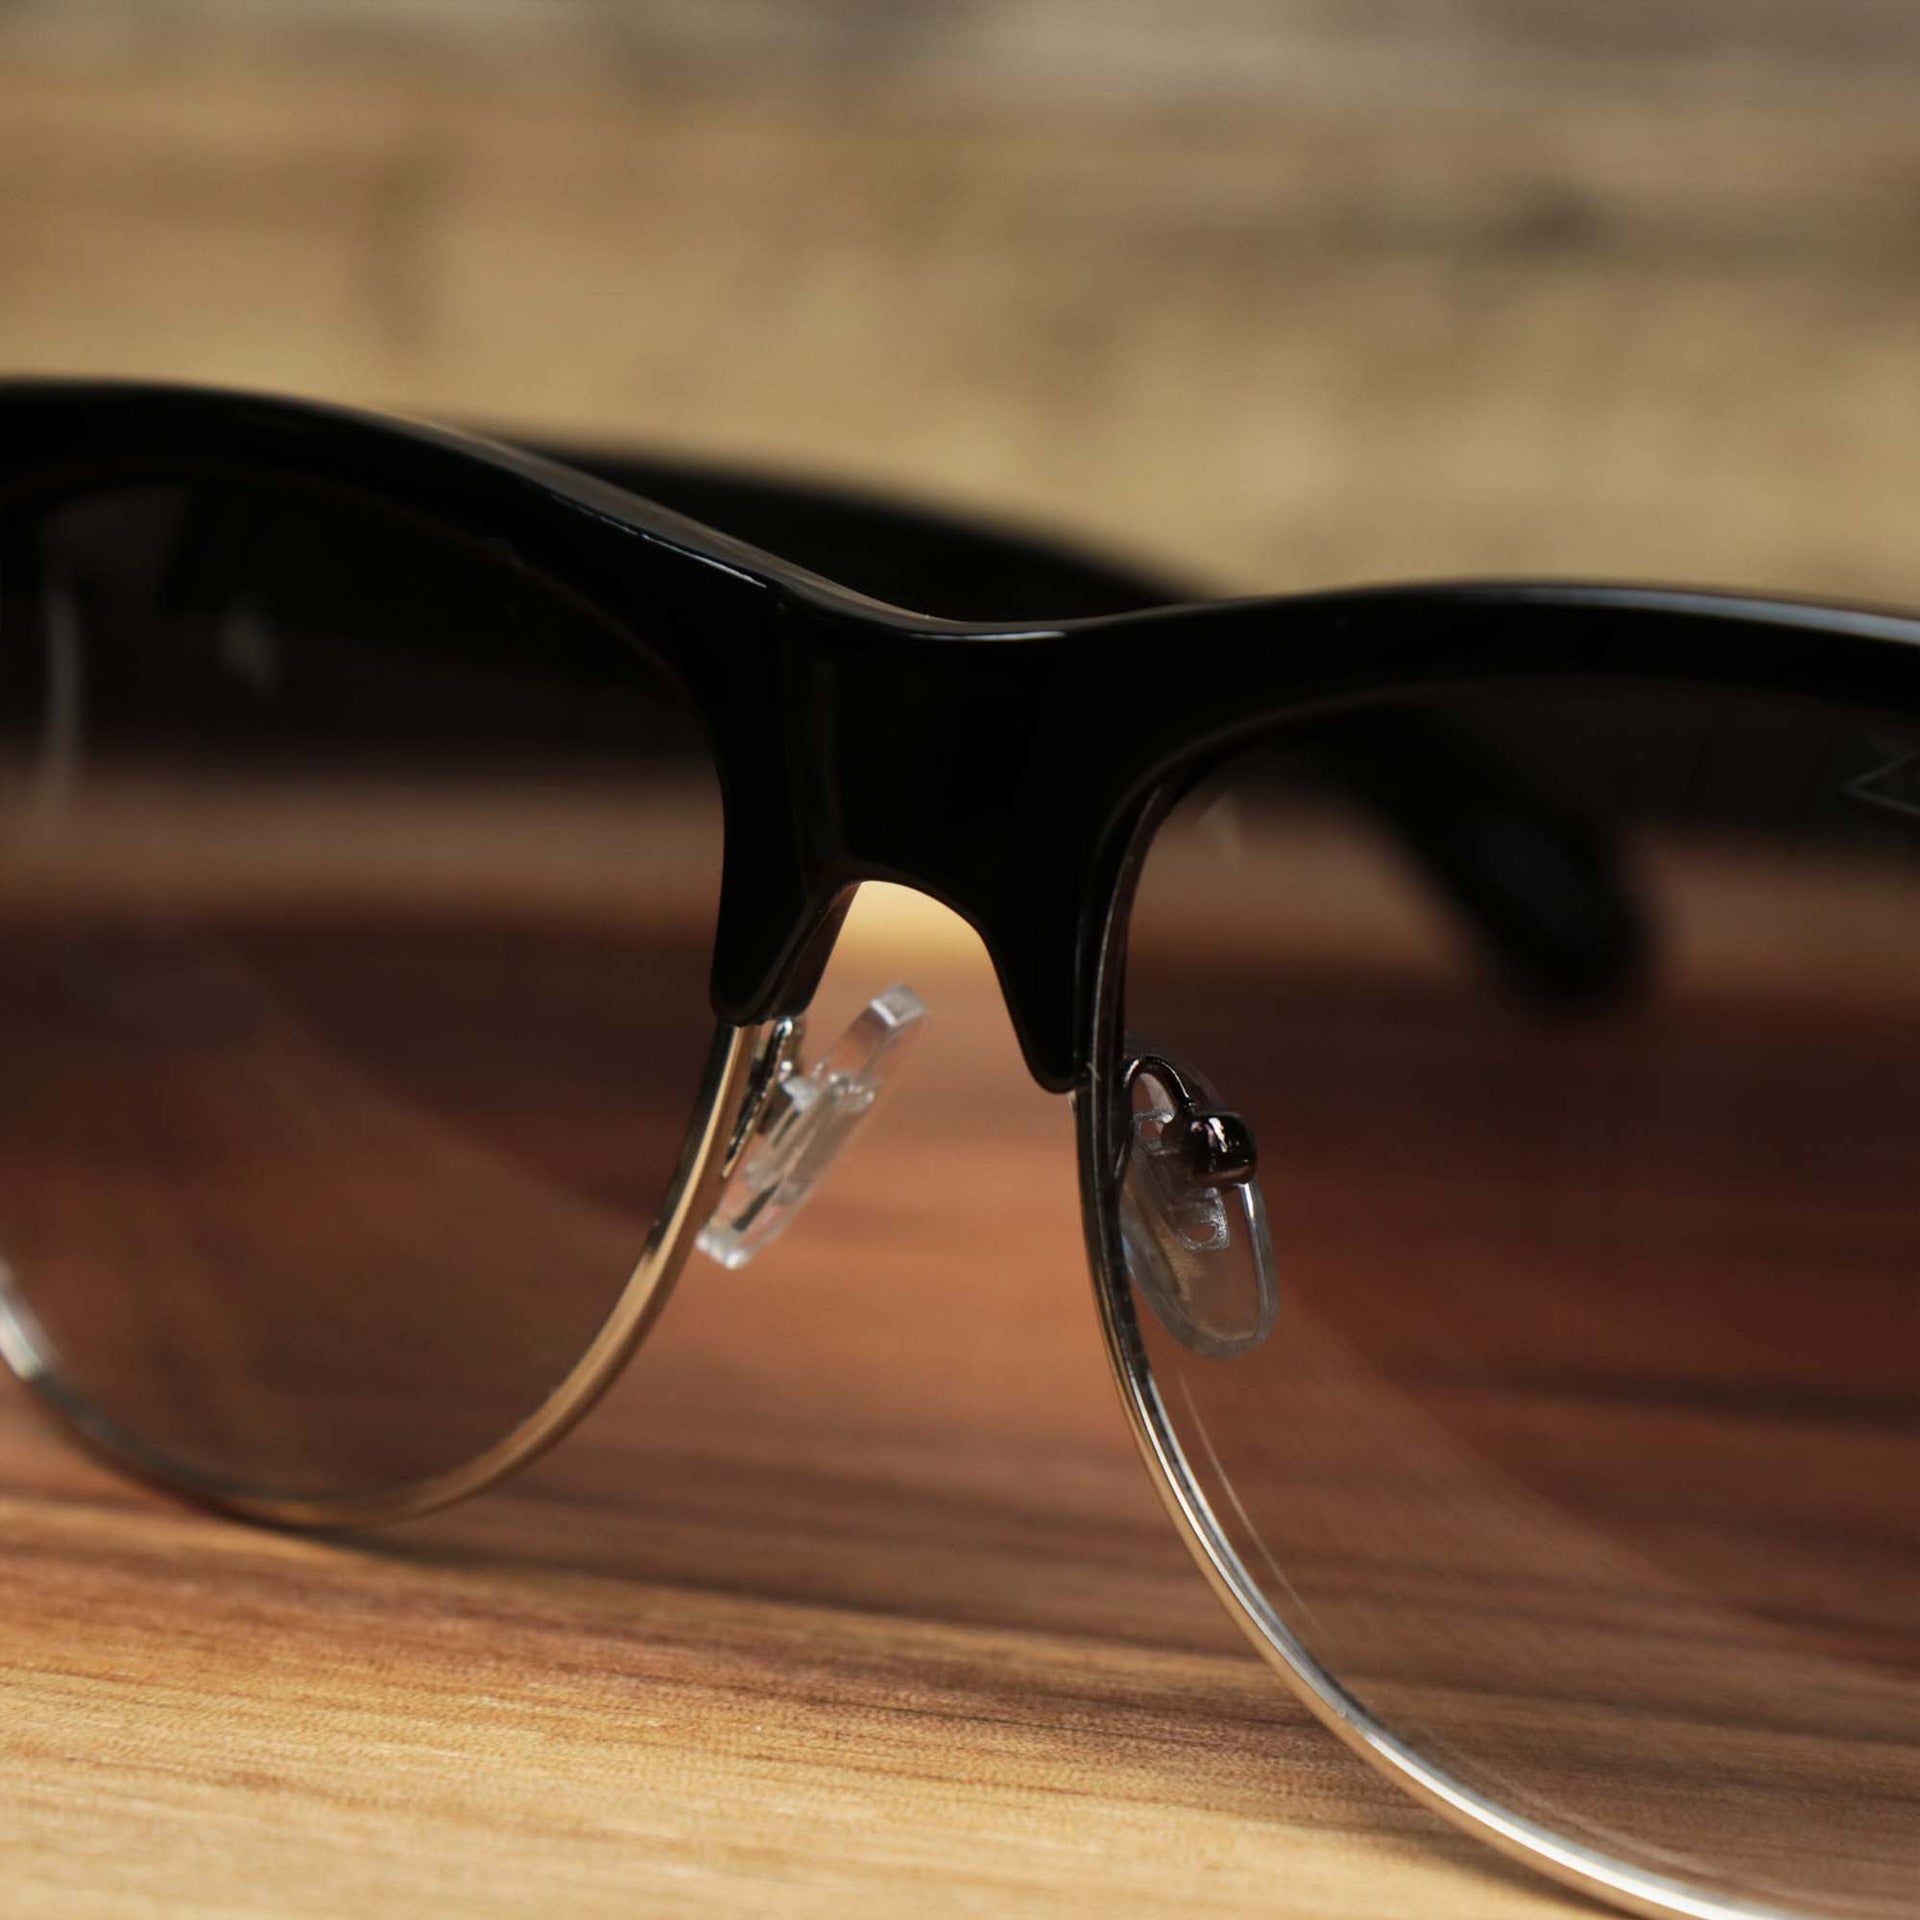 The bridge on the Thick Top and Metal Bottom Frame Black Lens Sunglasses with Black Frame